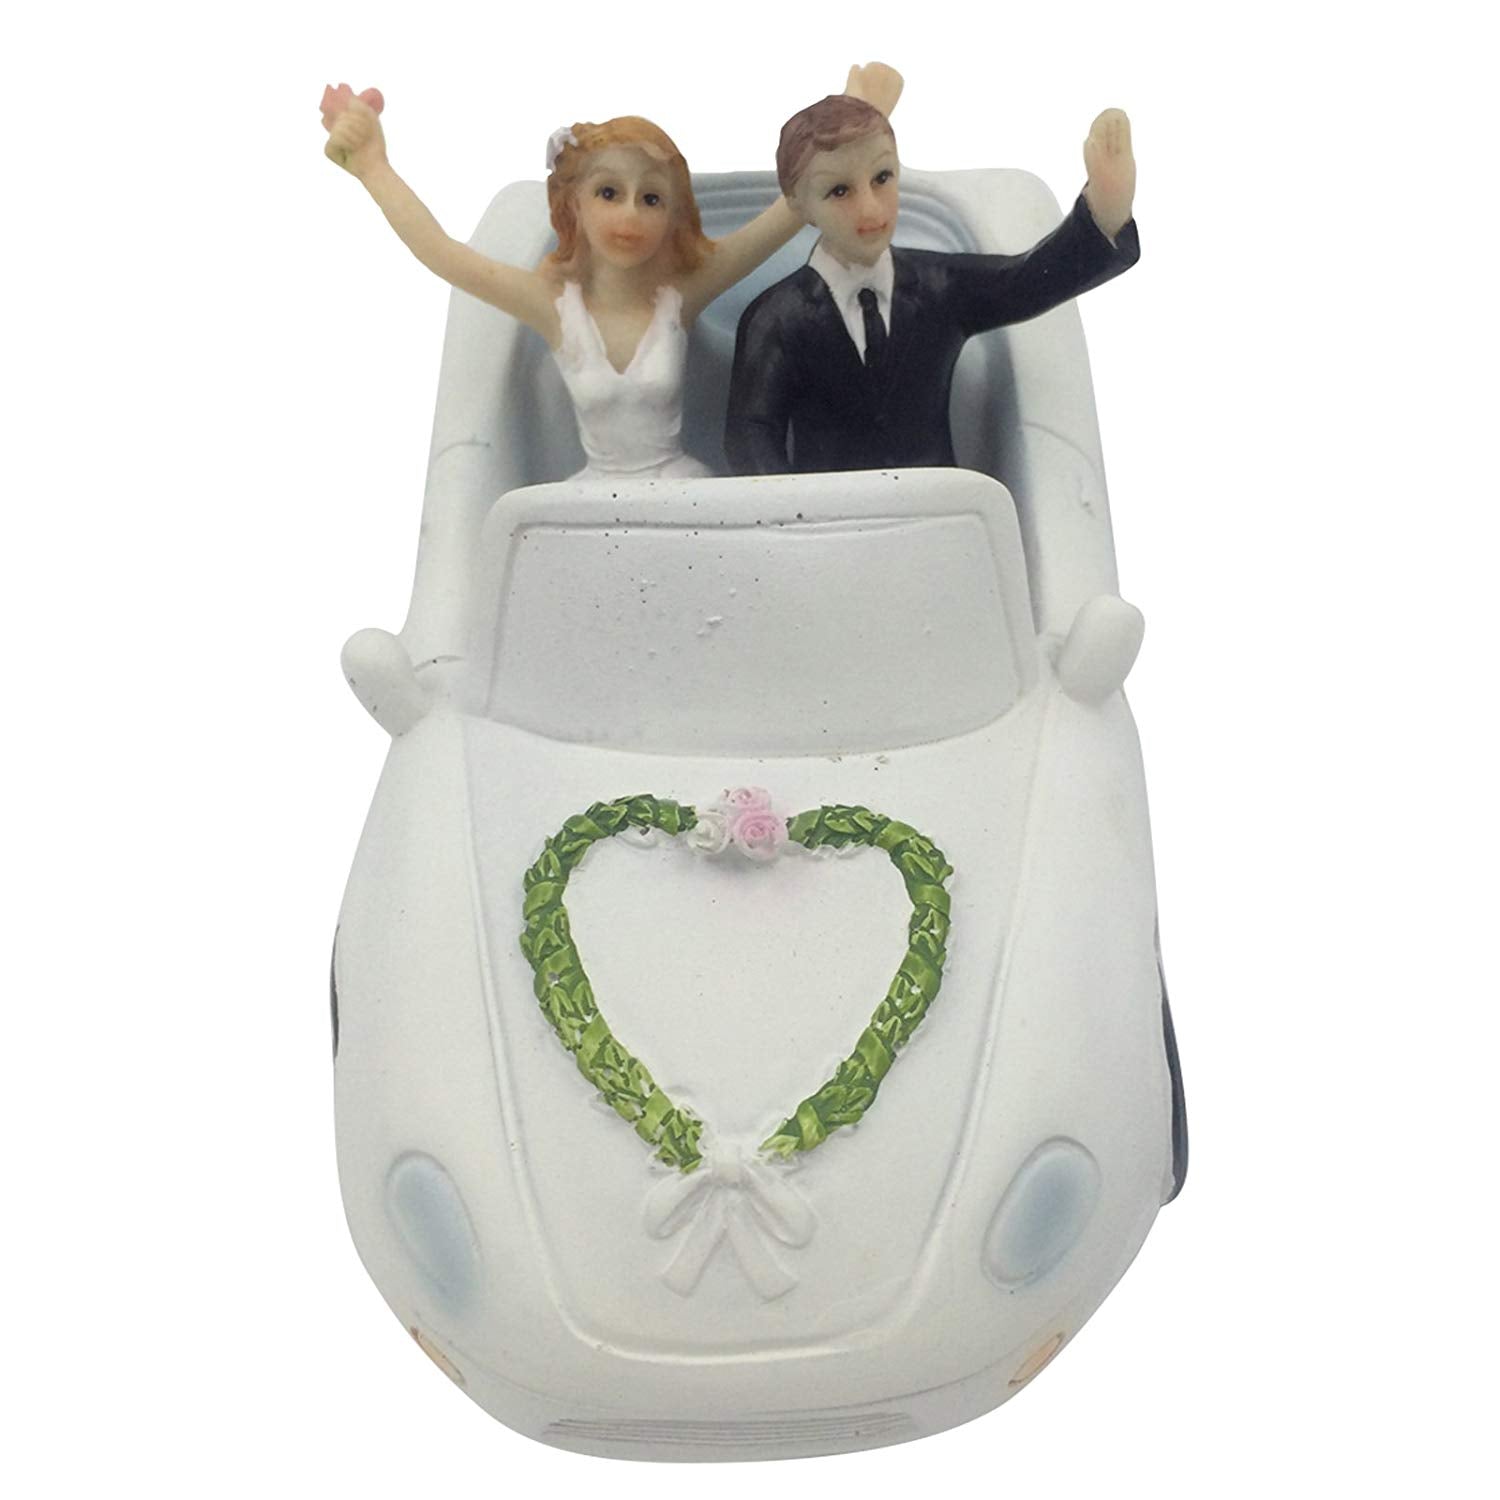 Waving in Car Couple Bride and Groom Wedding Cake Topper